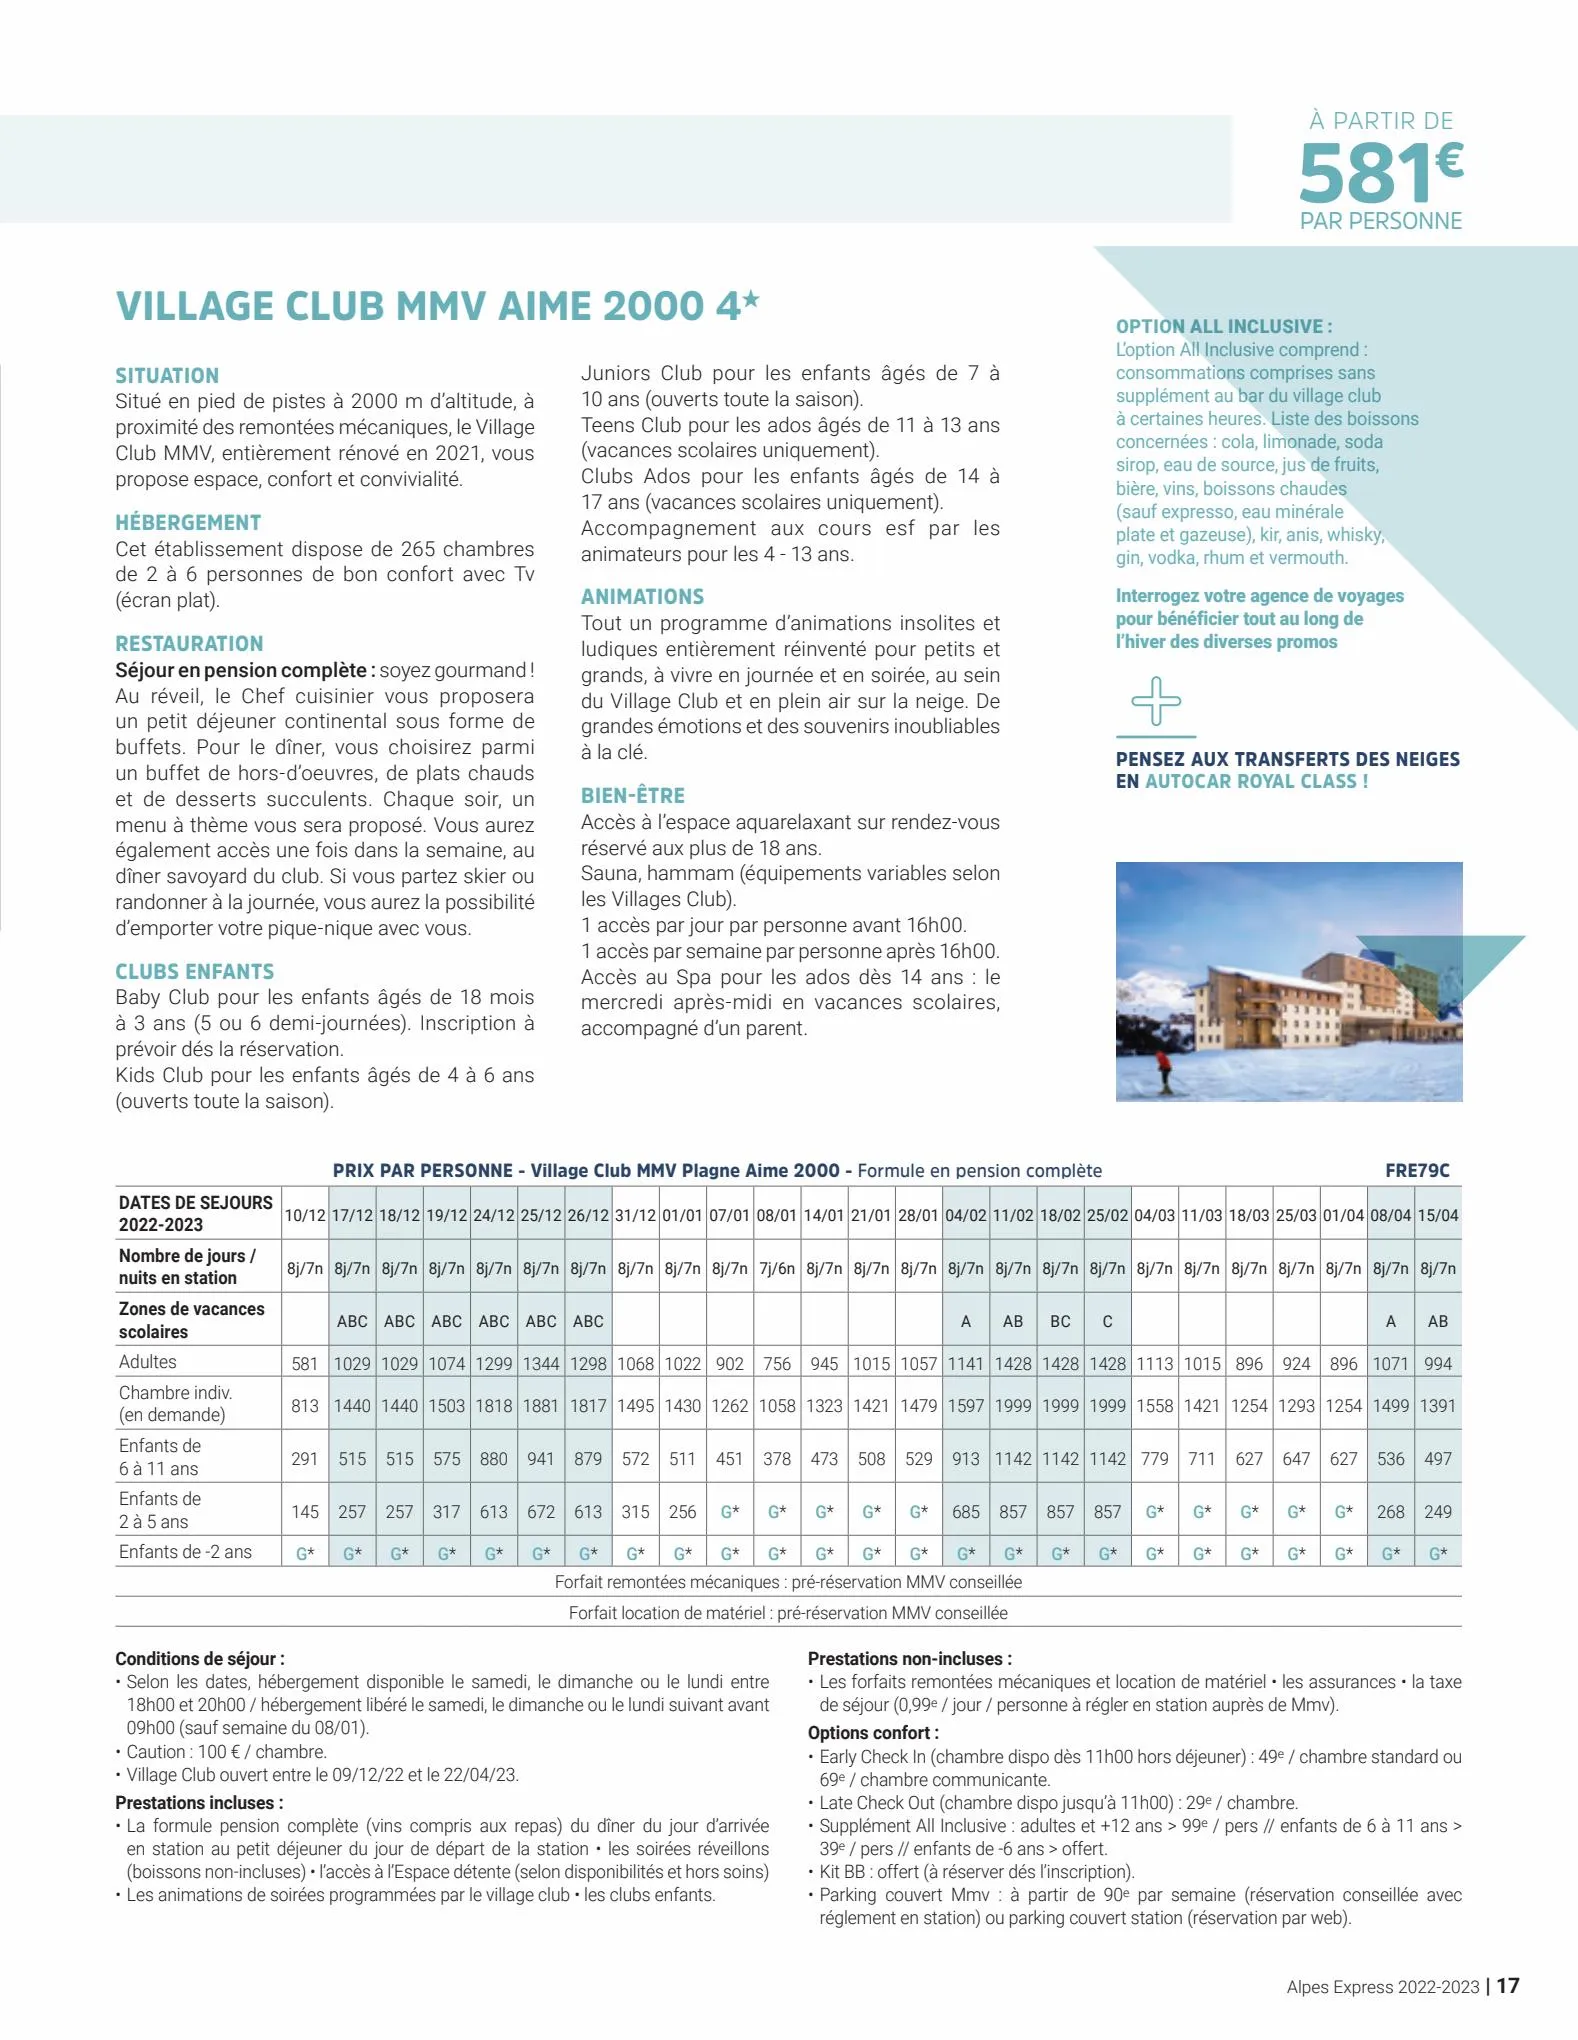 Catalogue Alpes Express - Hiver 2022-2023, page 00017